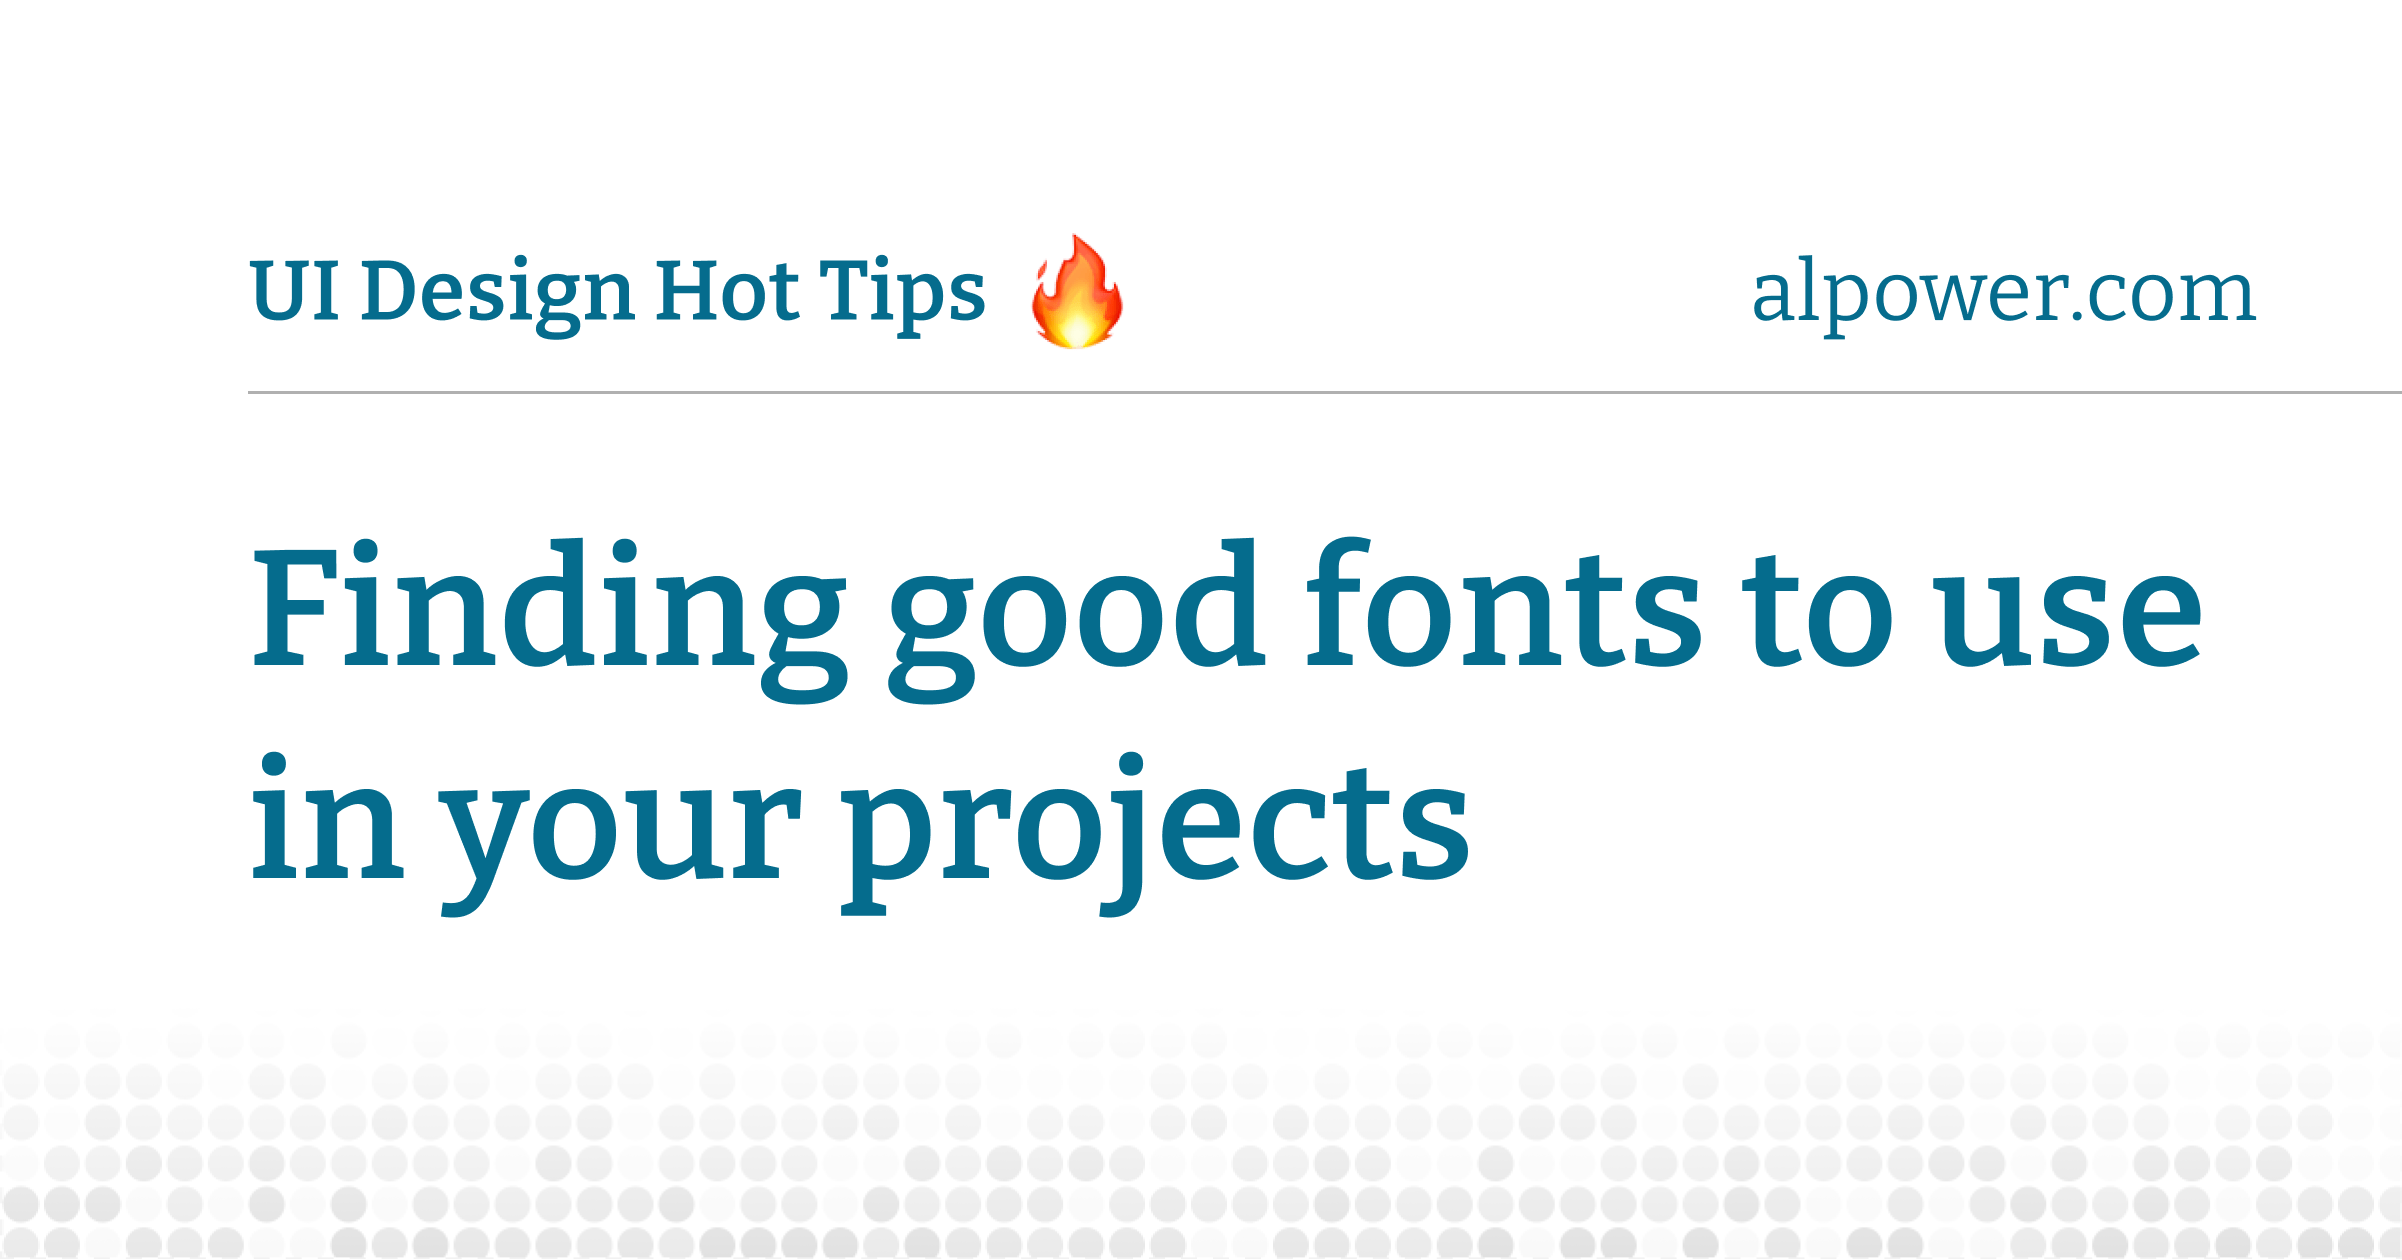 Finding good fonts to use in your projects